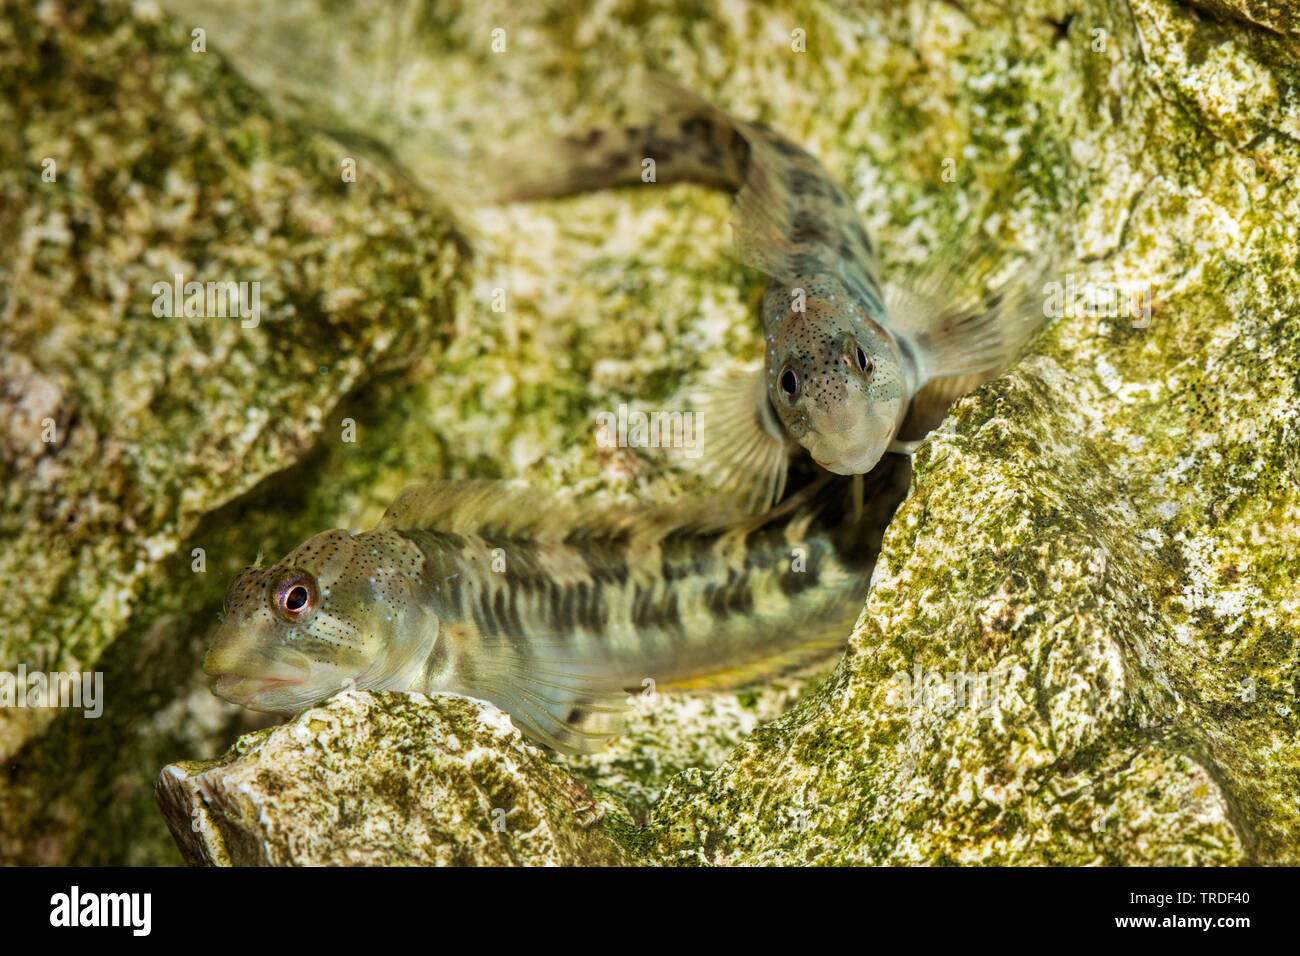 freshwater blenny, river blenny (Salaria fluviatilis, Lipophrys fluviatilis, Blennius fluviatilis), male and female from Lake Garda at a rock, Italy Stock Photo